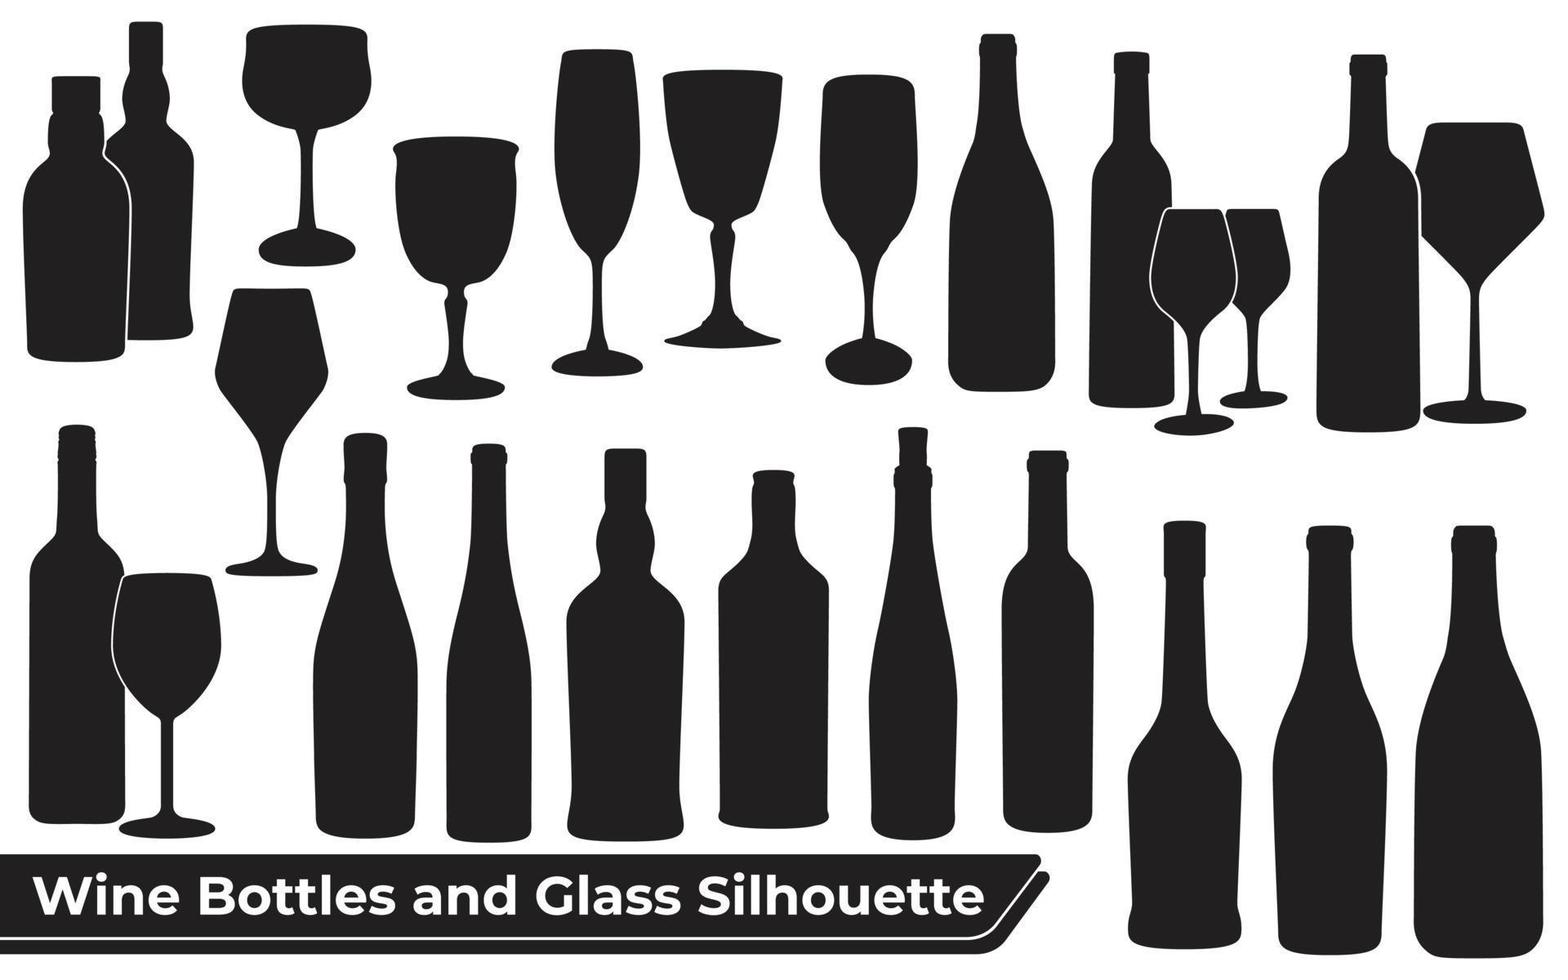 Wine Bottles and Glass Silhouette vector